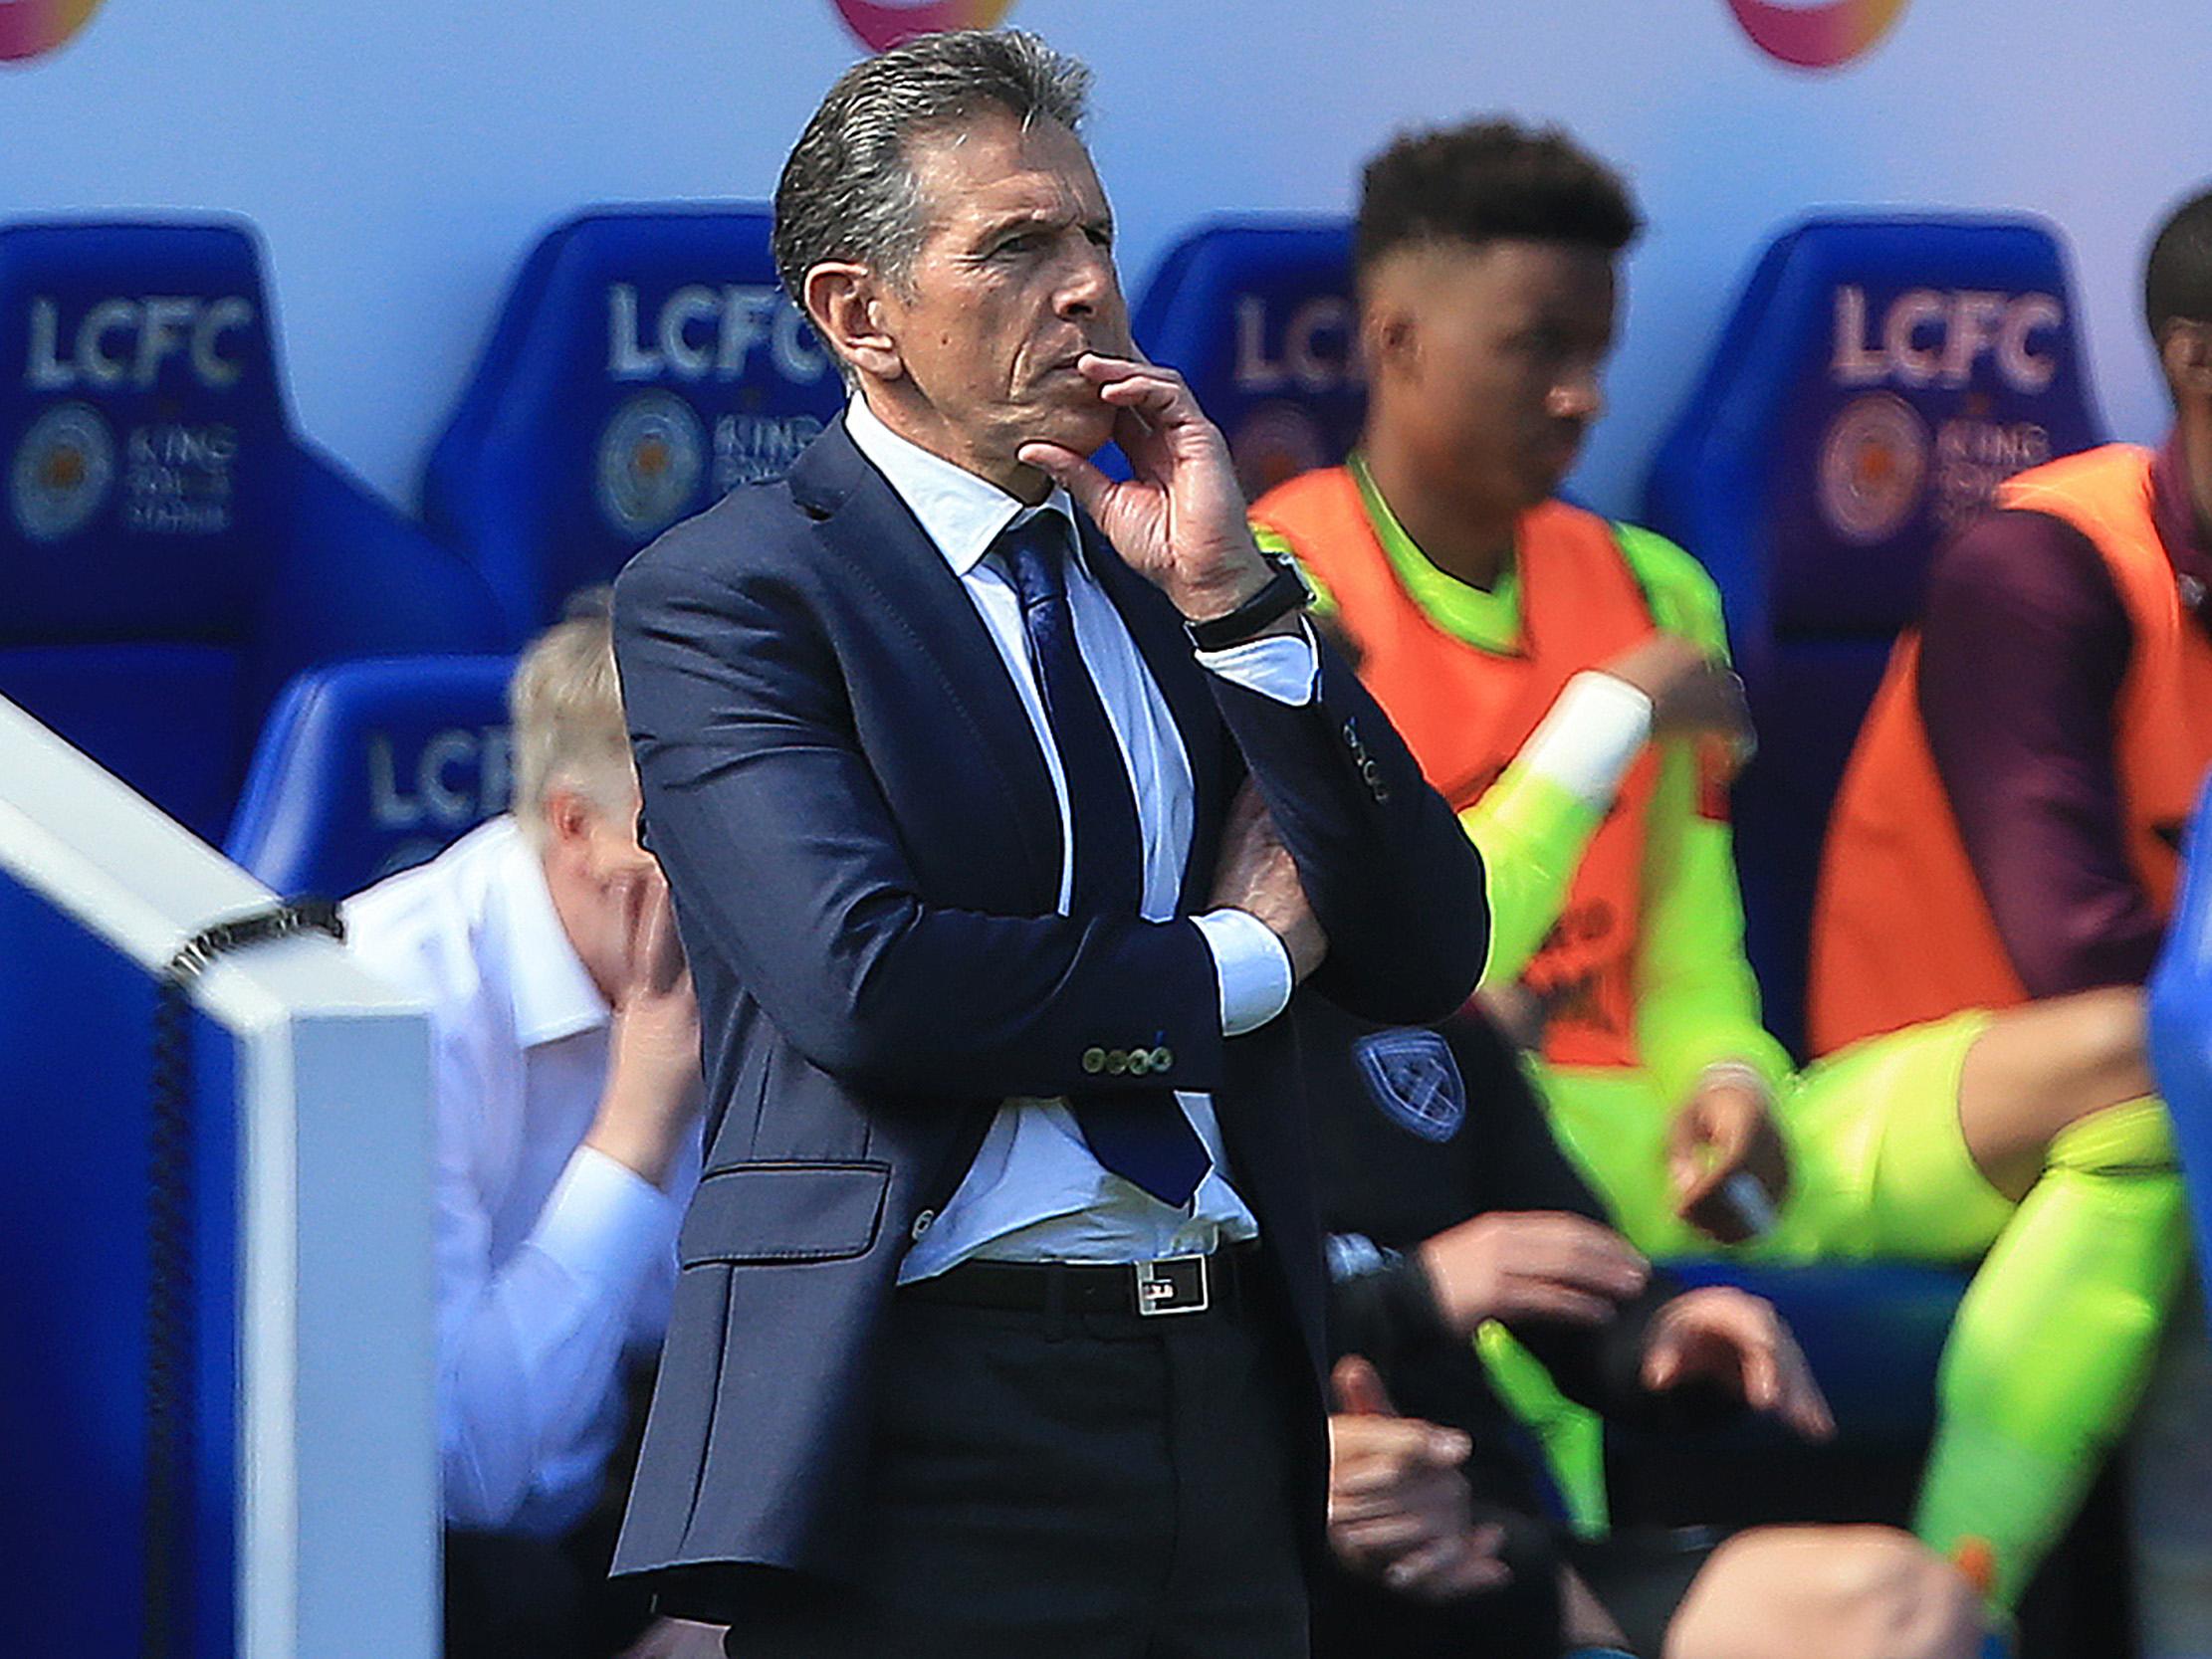 Puel has defended his record at Leicester